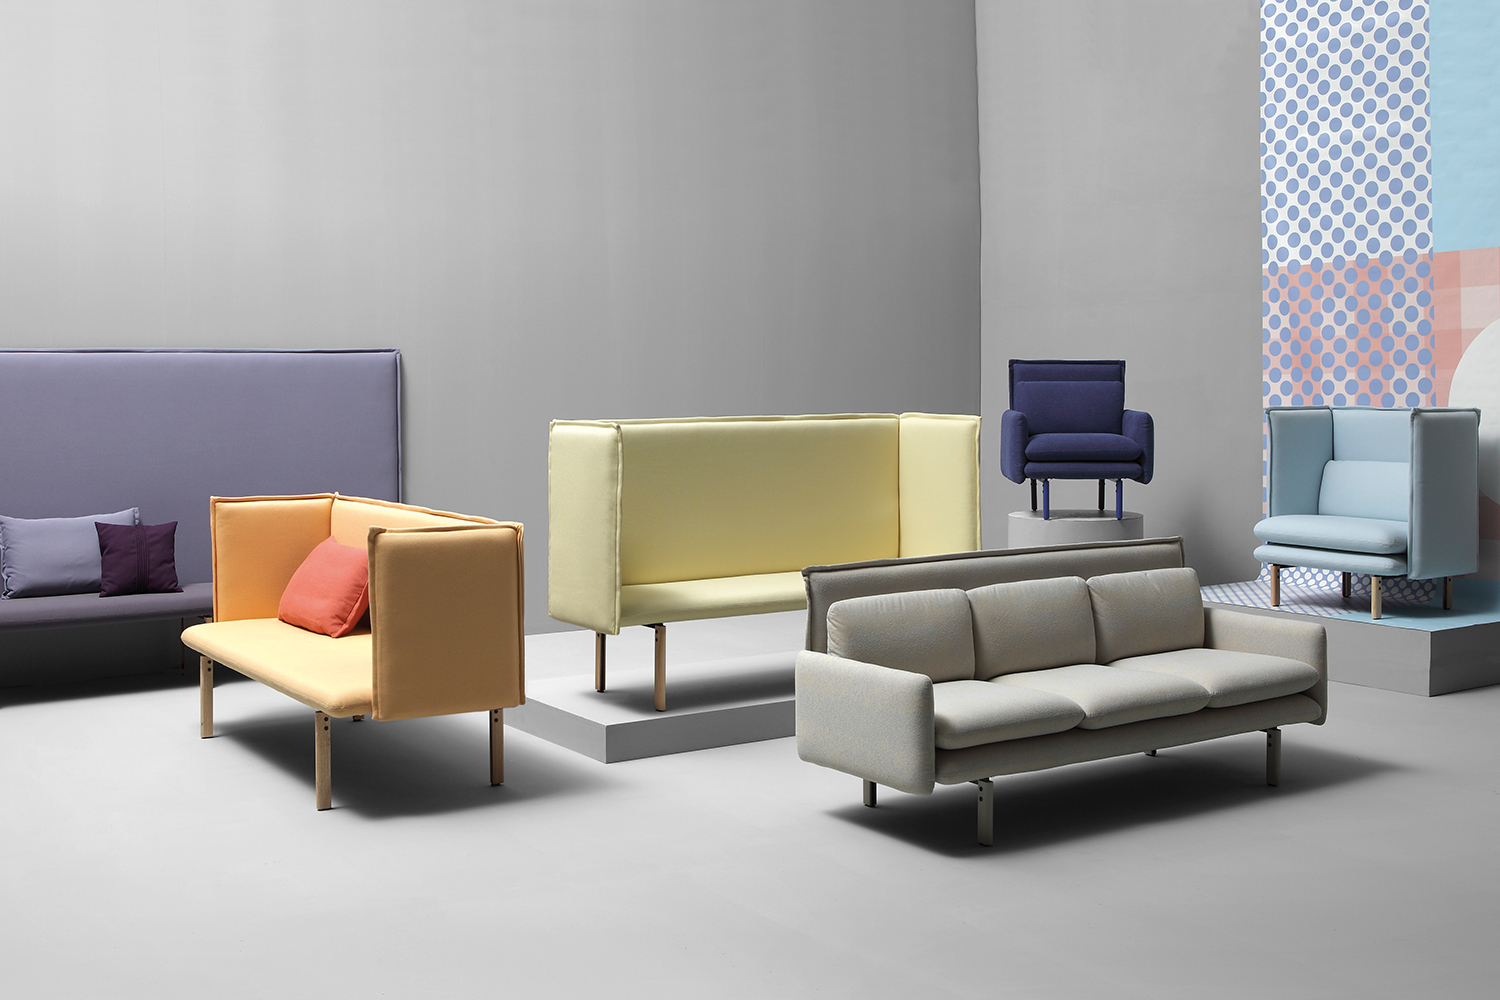 Sancal's fresh and functional furniture continues to set trends.